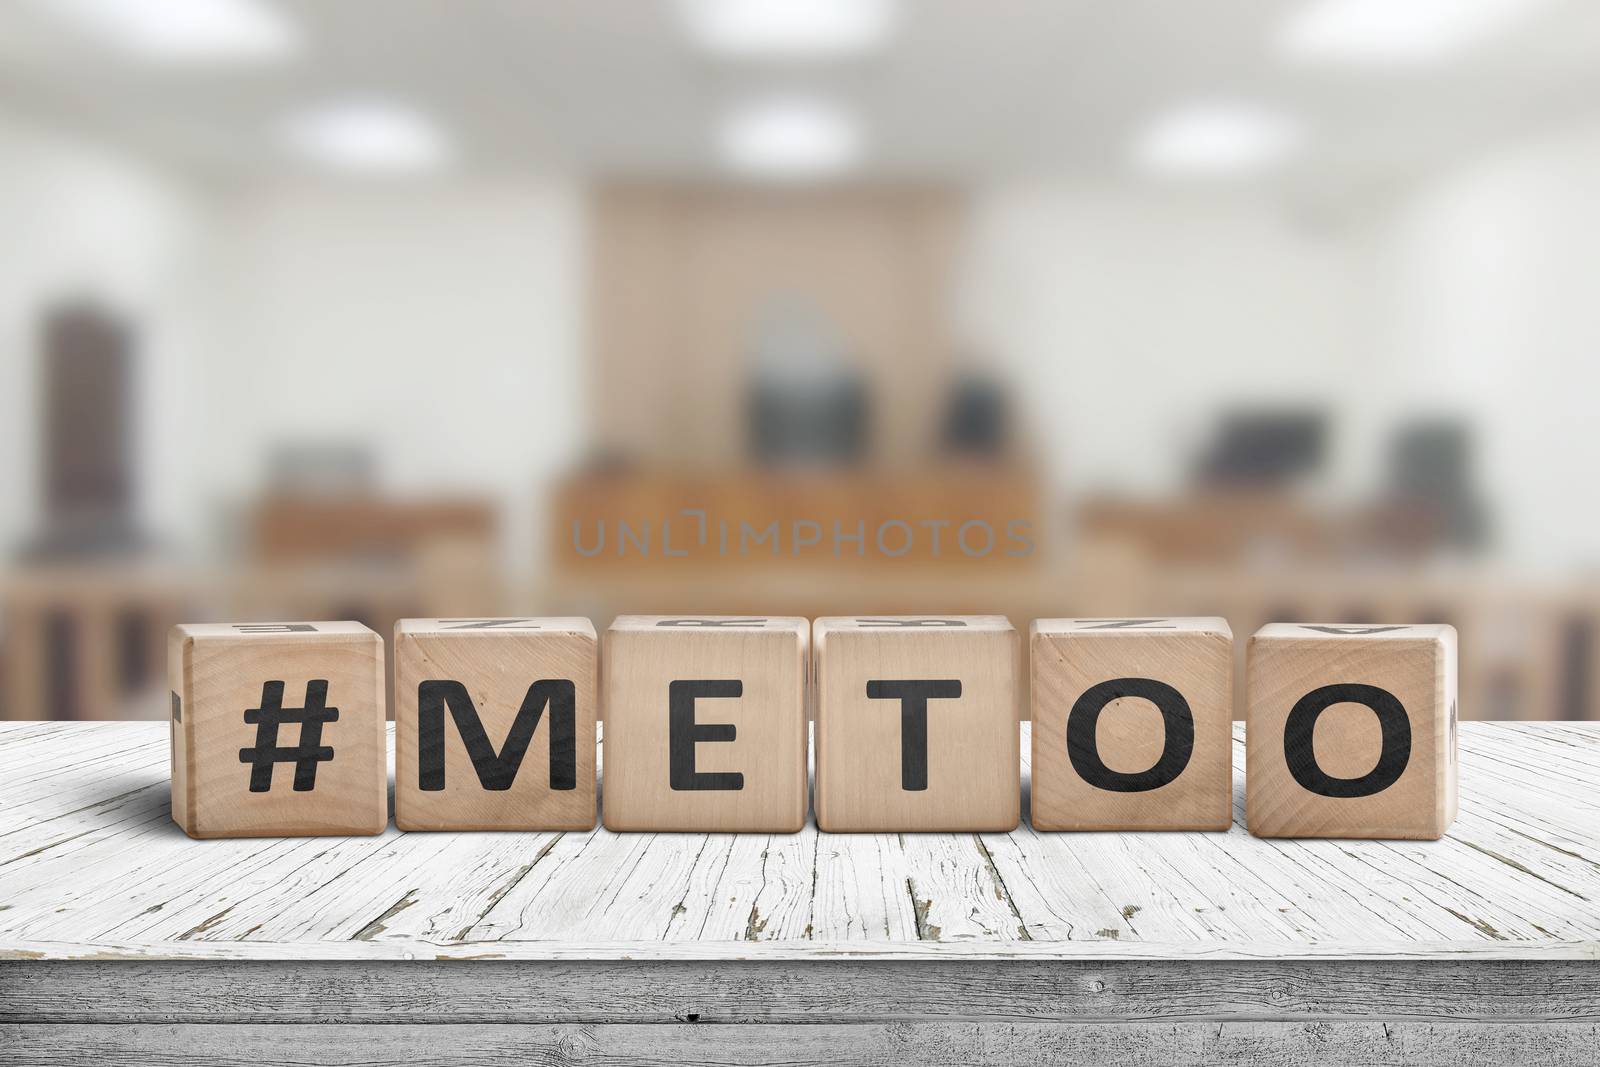 Metoo hashtag sign made of cubes on a wooden table in a courtroom